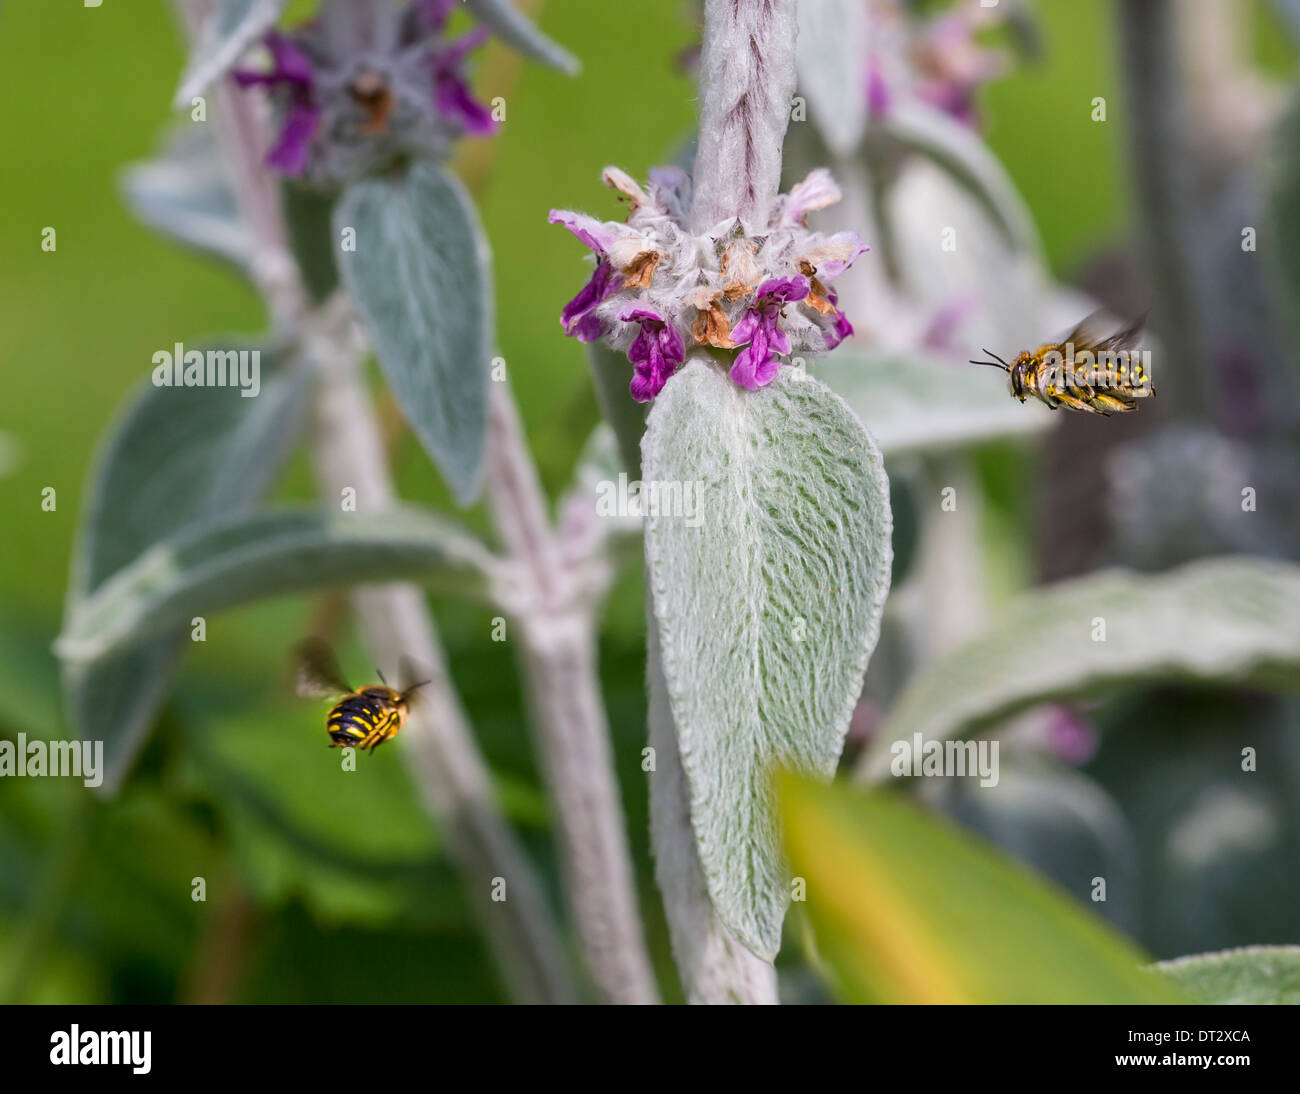 Male wool carder bees in flight patrolling their patch of Stachys byzanticum (lamb's ear) Stock Photo